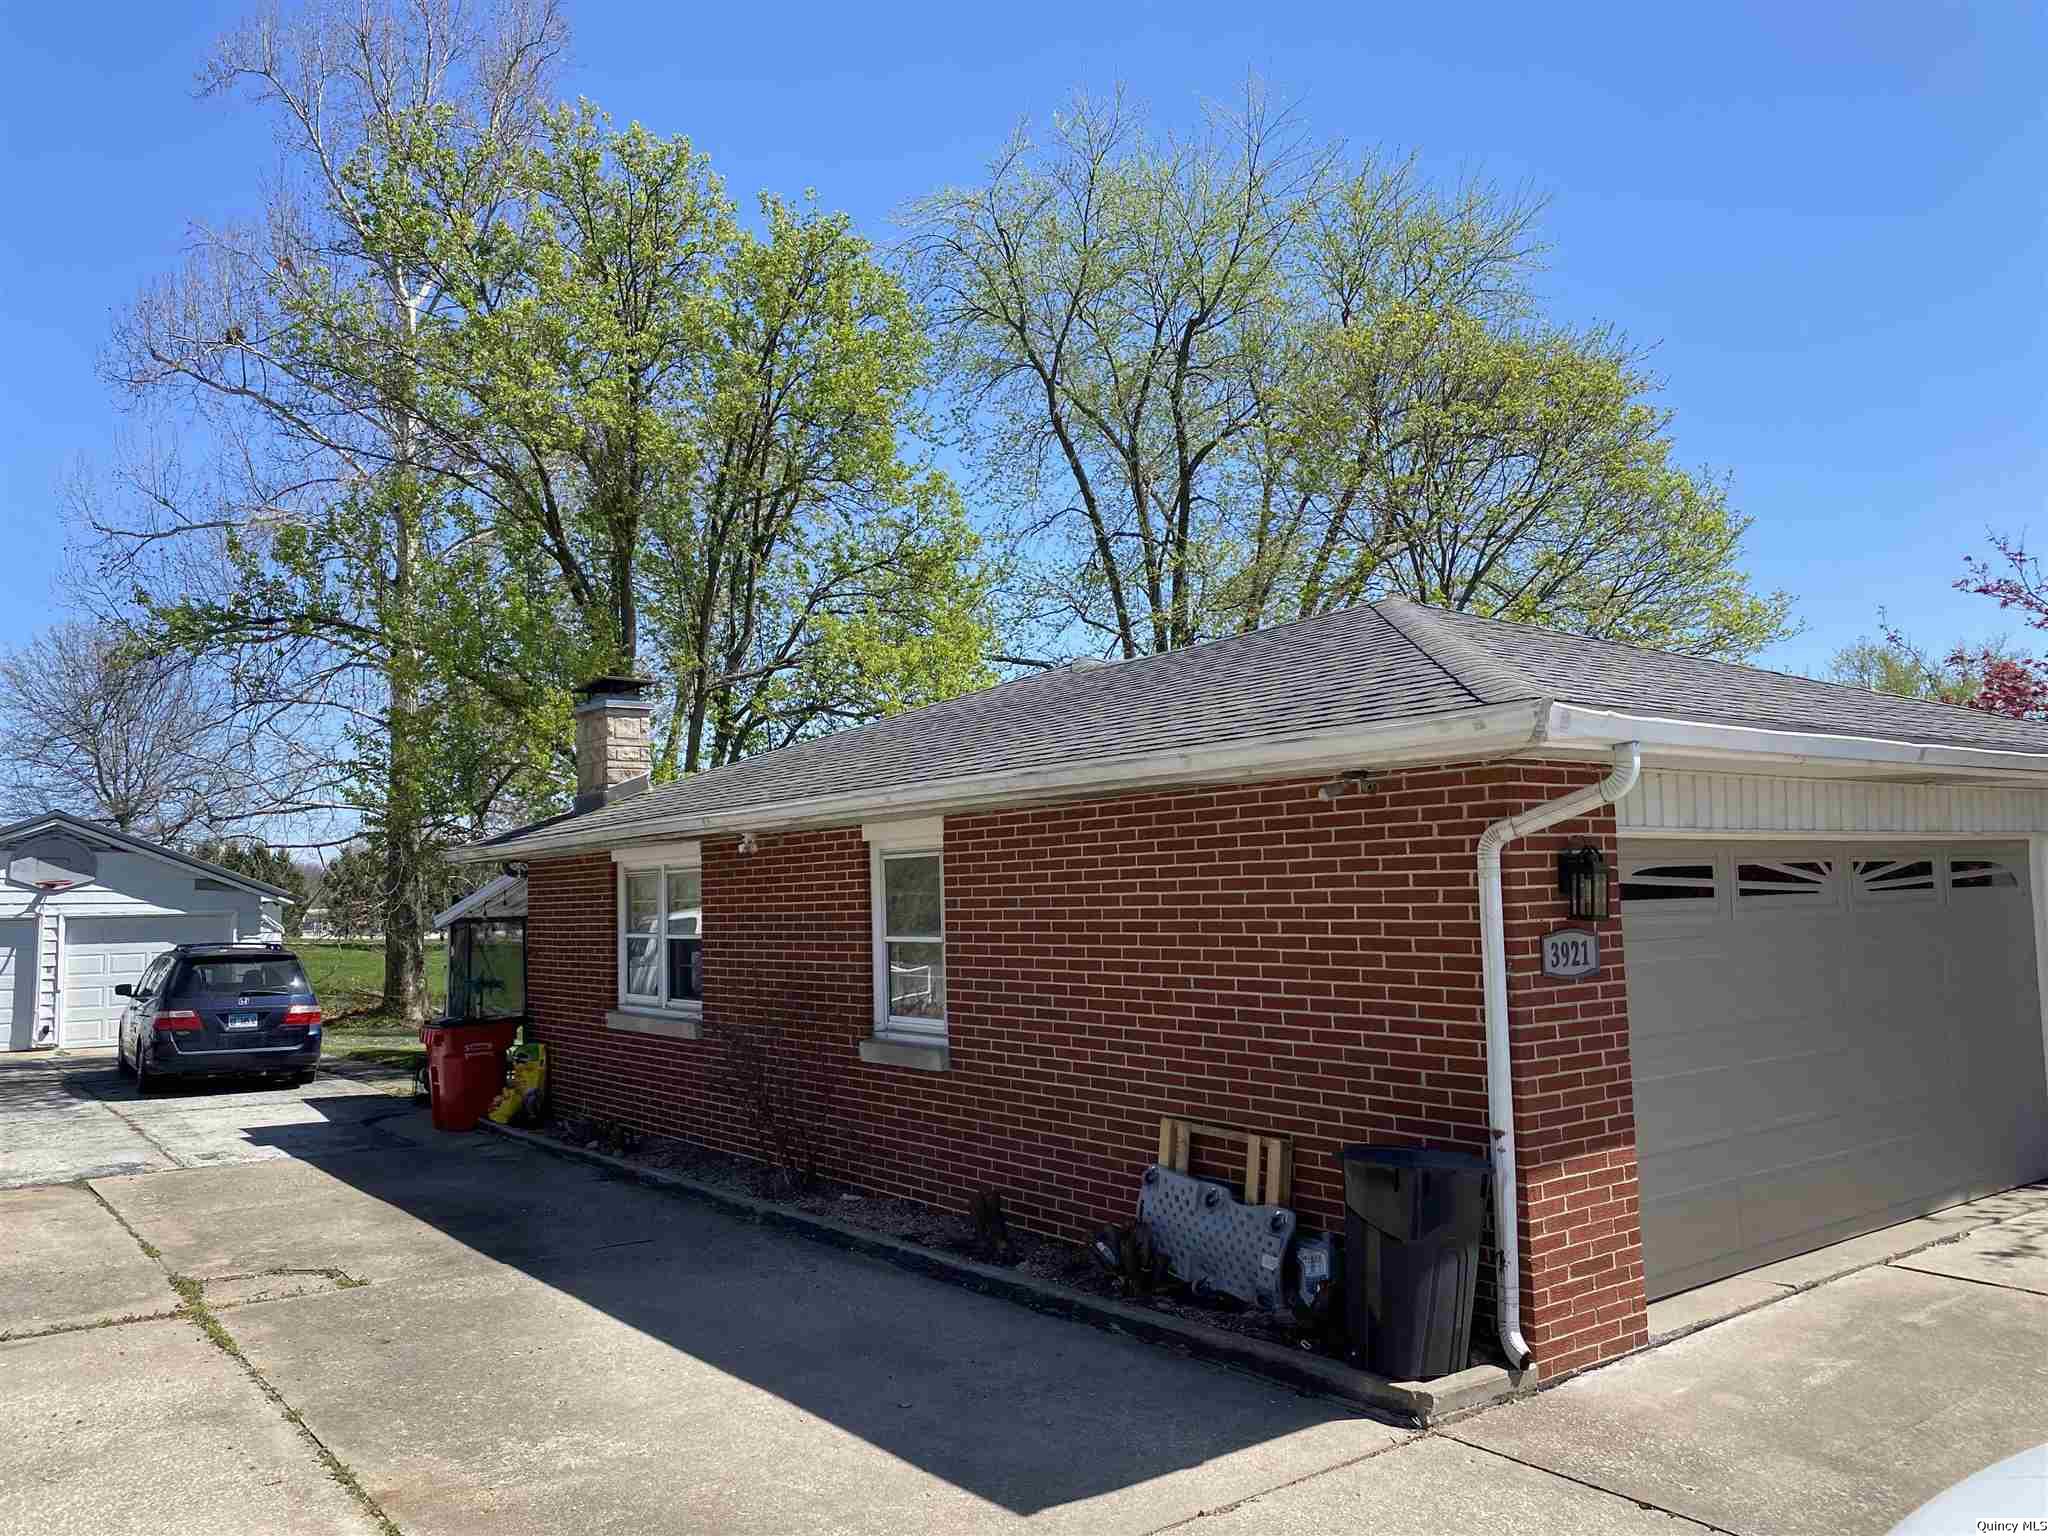 3921 S 24th, Quincy, Illinois 62305, 4 Bedrooms Bedrooms, ,2 BathroomsBathrooms,Residential,For Sale,3921 S 24th,203351